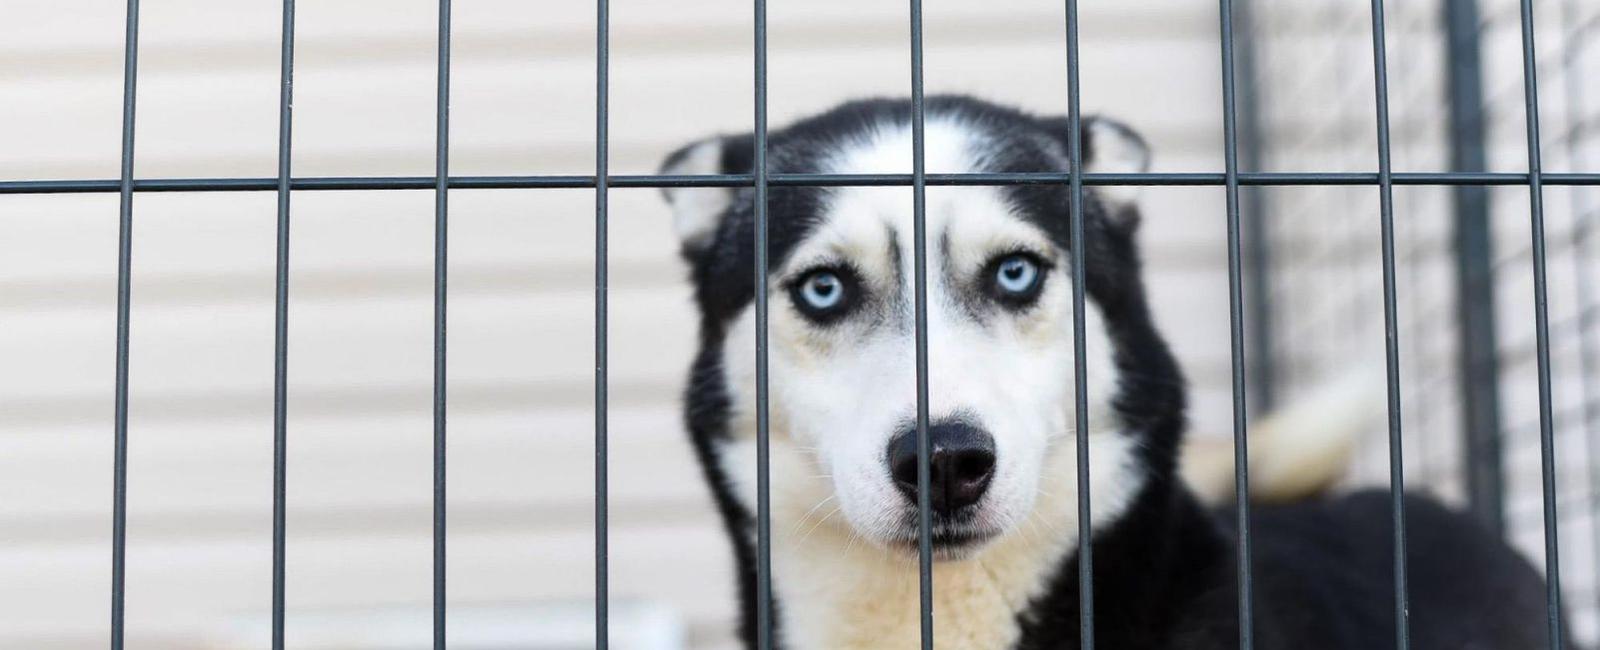 Dog Timeout in the Crate: Should You Do It?